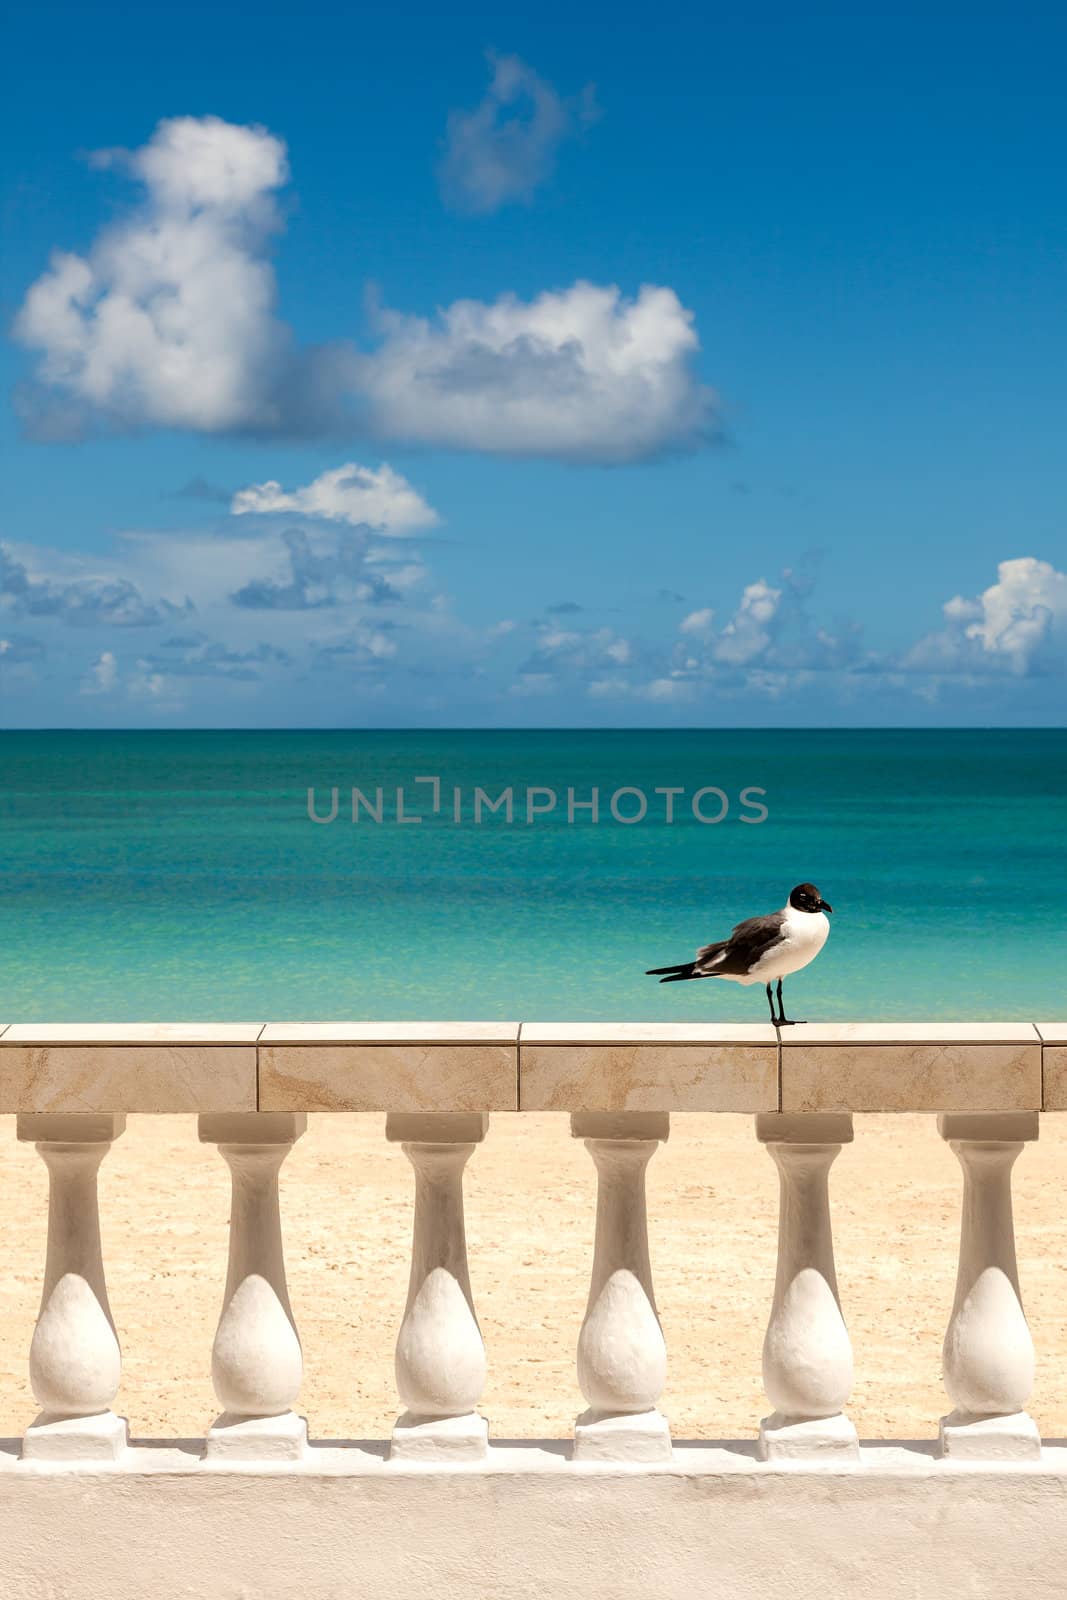 Sunny Tropical Caribbean Seascape with Gull sitting on Pillared Fence